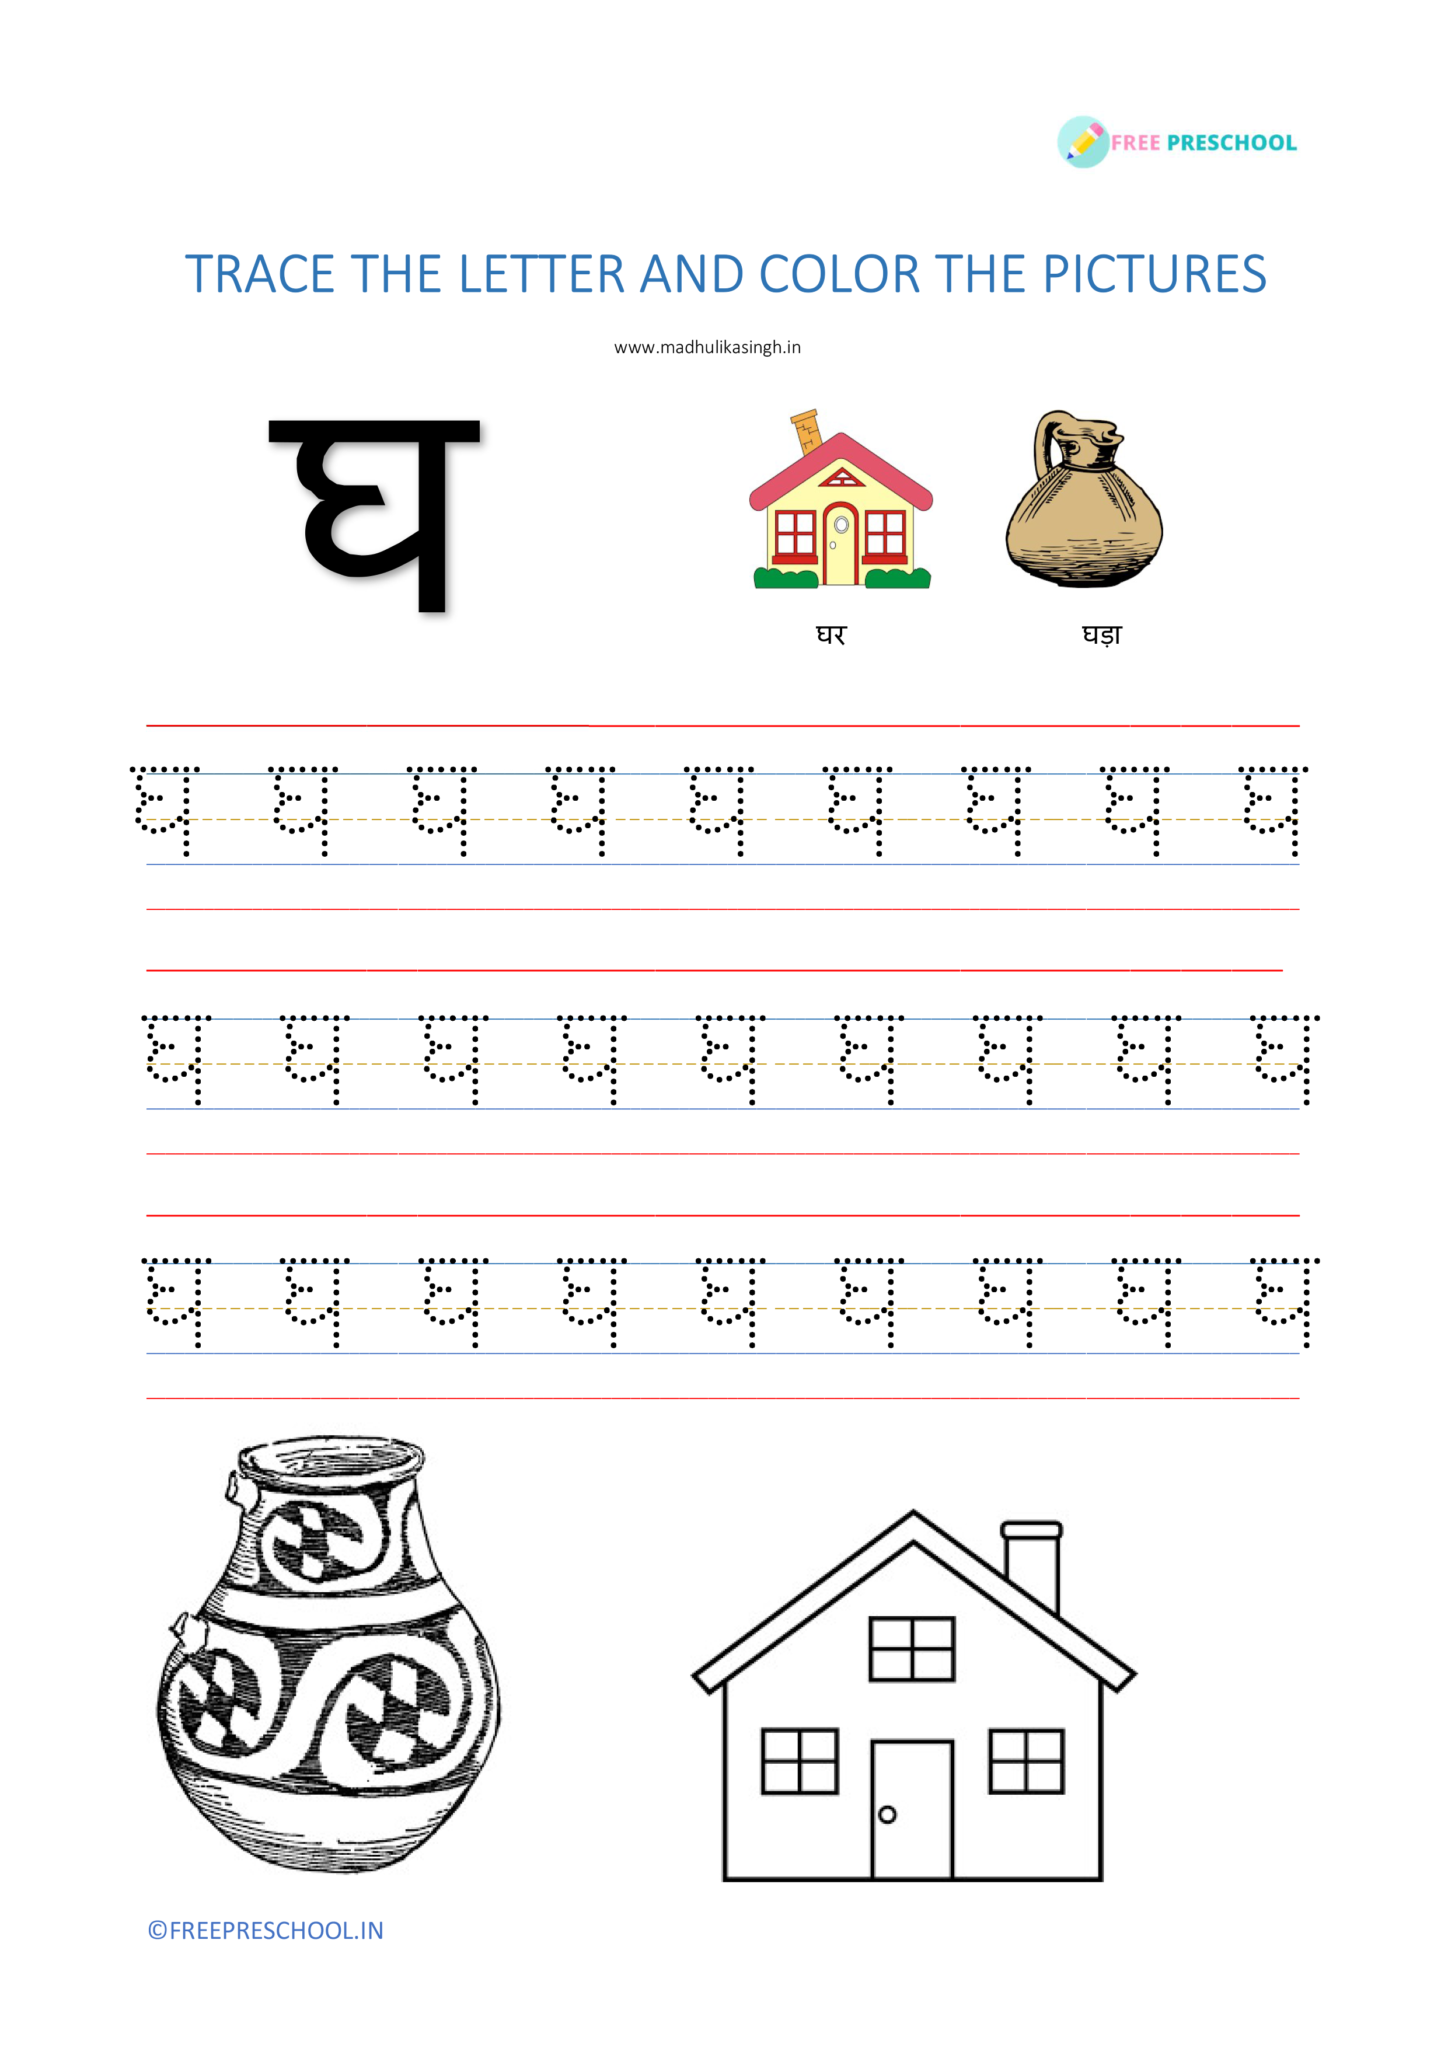 hindi alphabet tracing worksheets printable pdf a to jania 56 pages free preschool